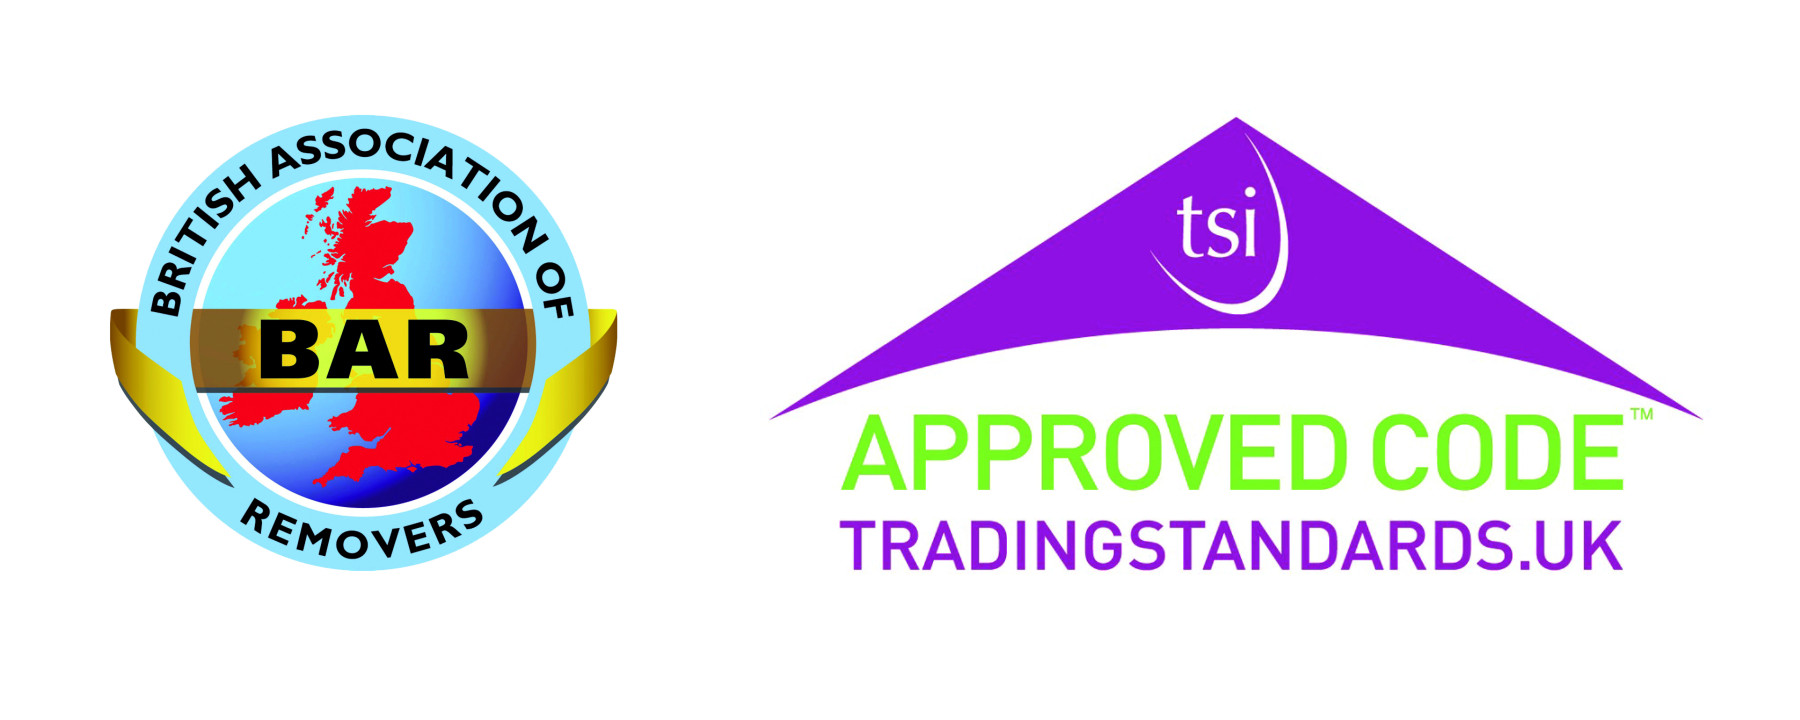 BAR logo and Approved code trading standards logo